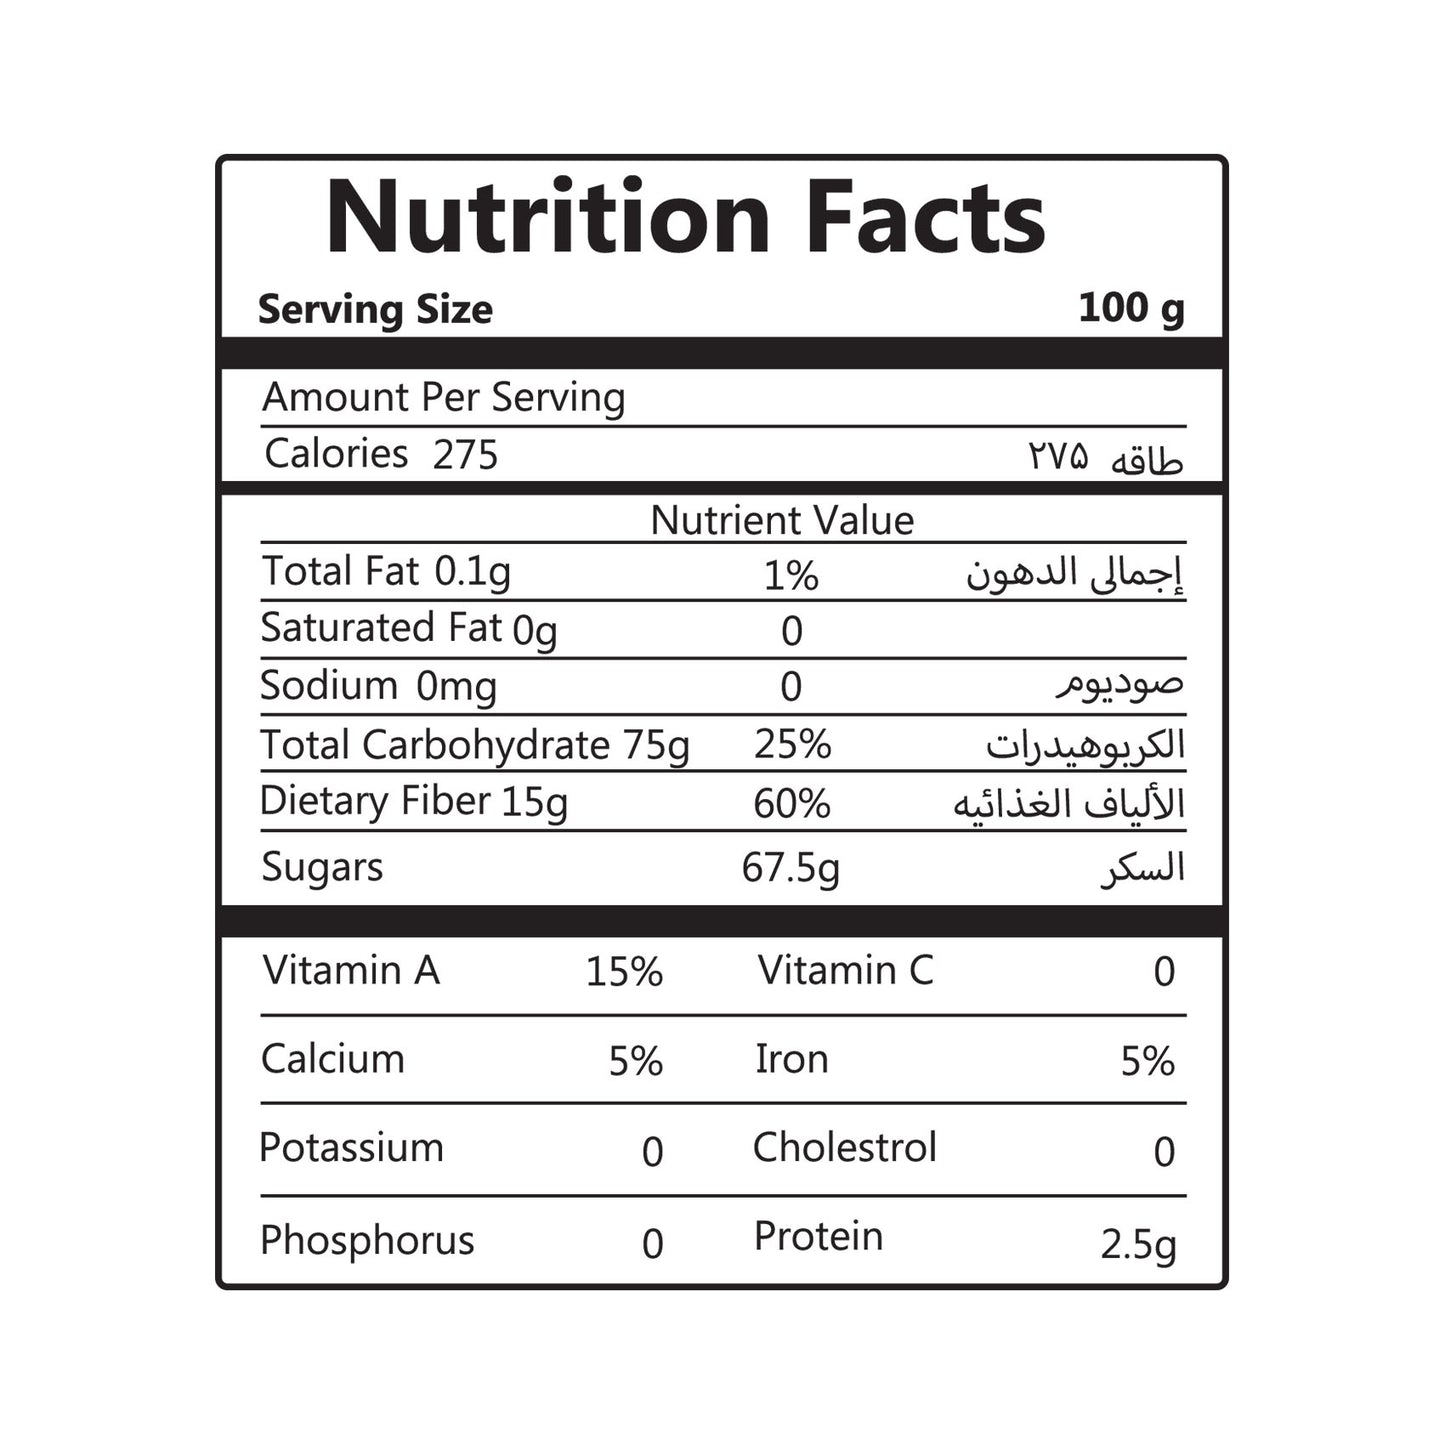 dried persimmon calories, dried persimmon nutrition facts, high protein snacks, vitamin a dry fruits